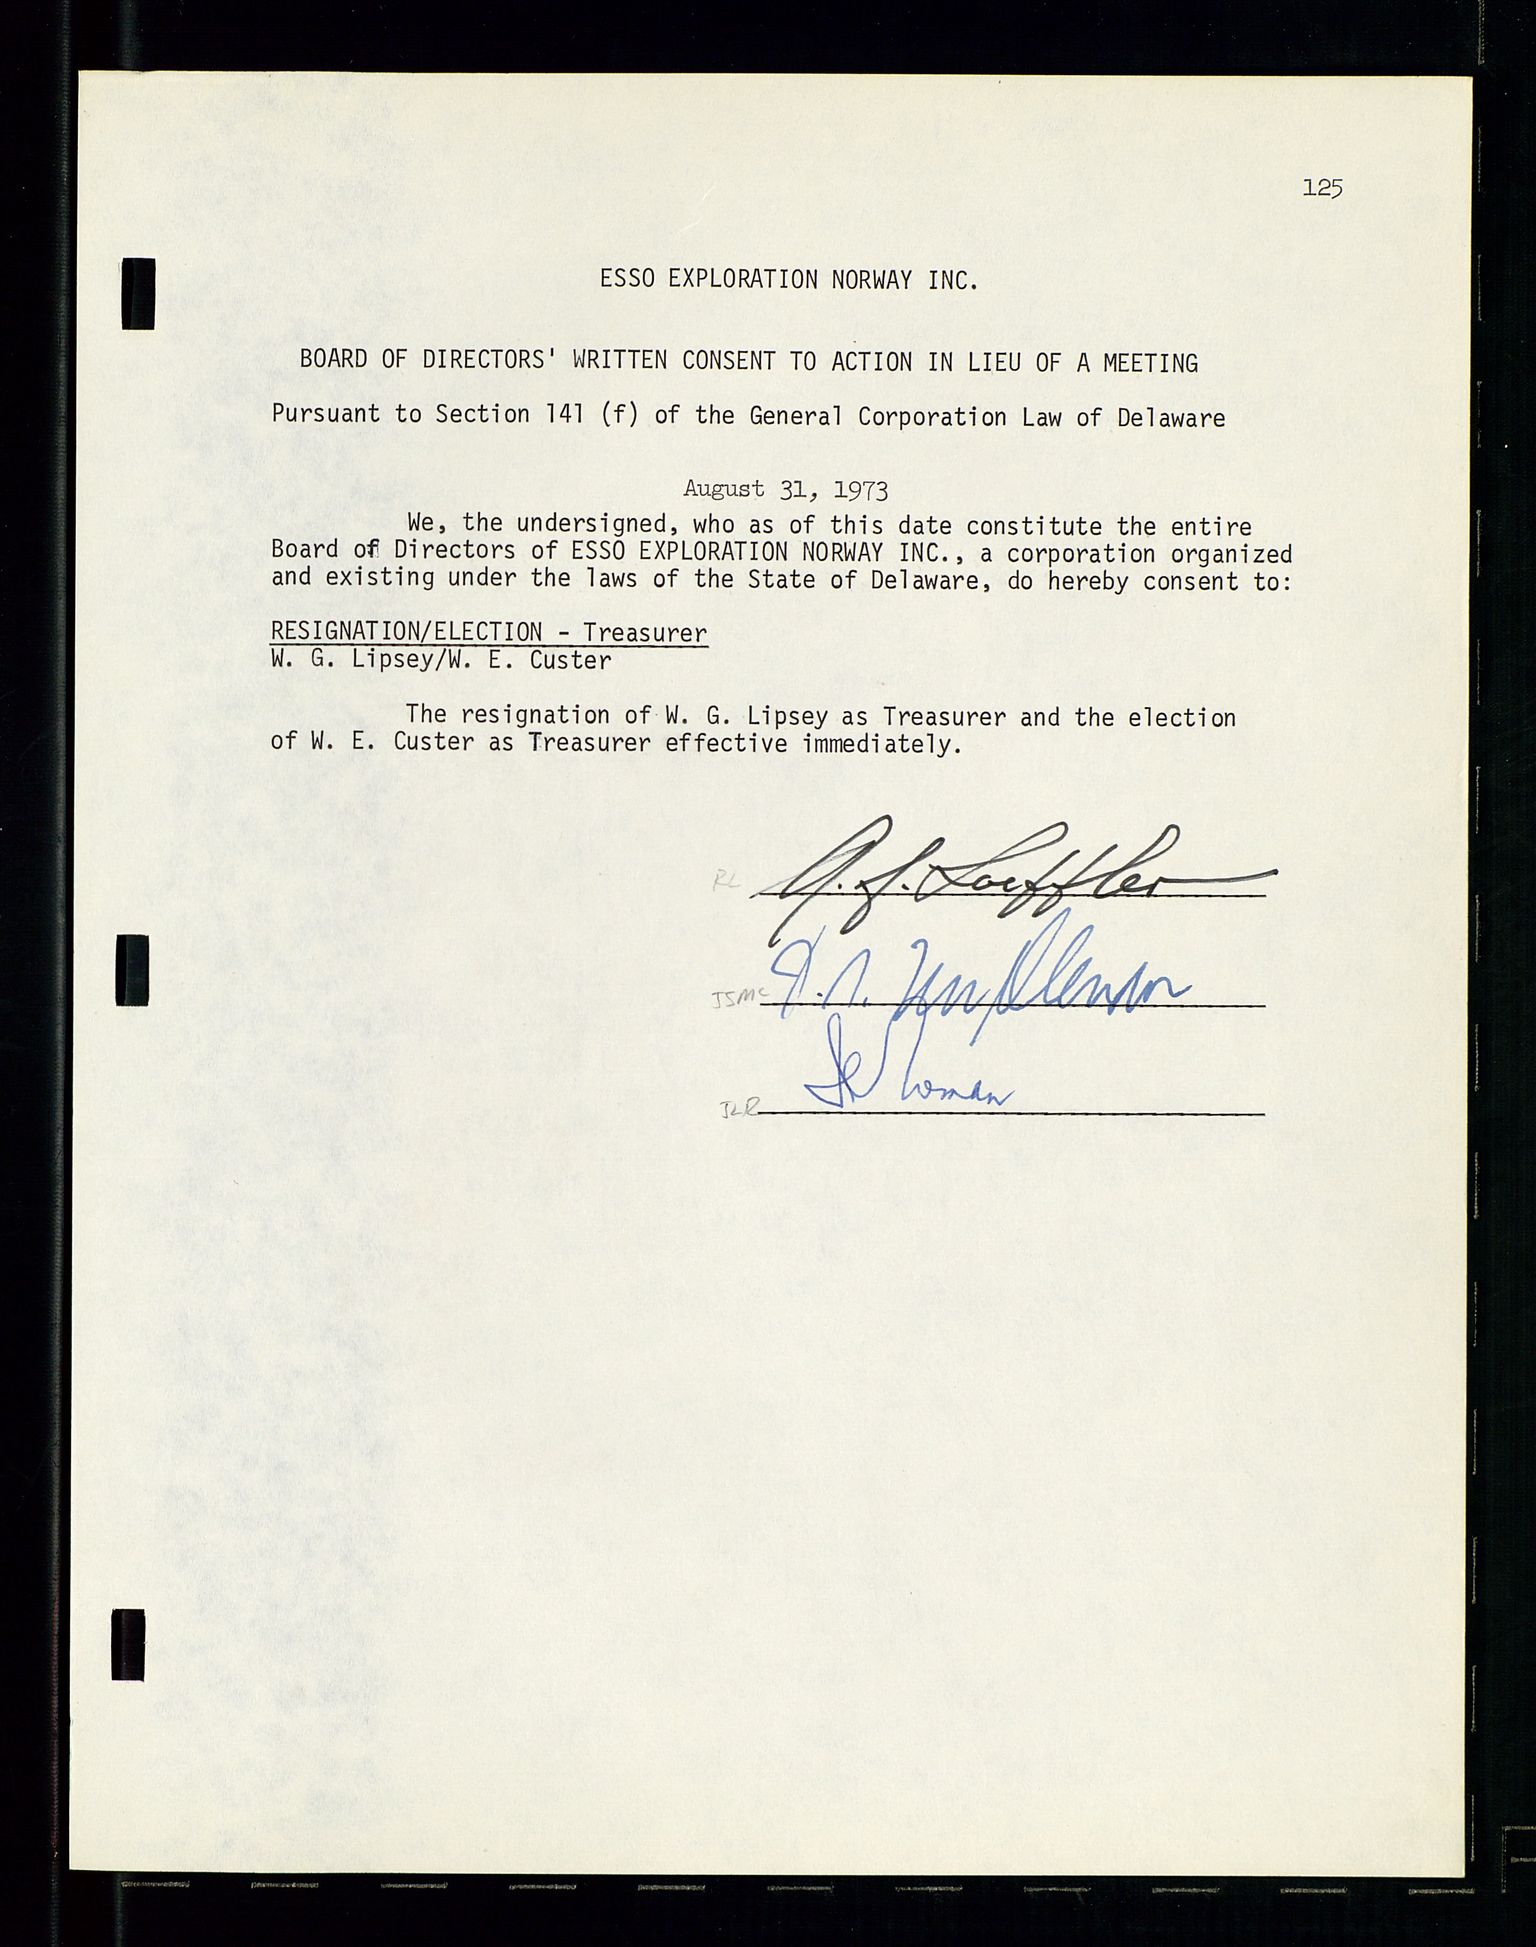 Pa 1512 - Esso Exploration and Production Norway Inc., SAST/A-101917/A/Aa/L0001/0001: Styredokumenter / Corporate records, By-Laws, Board meeting minutes, Incorporations, 1965-1975, s. 125